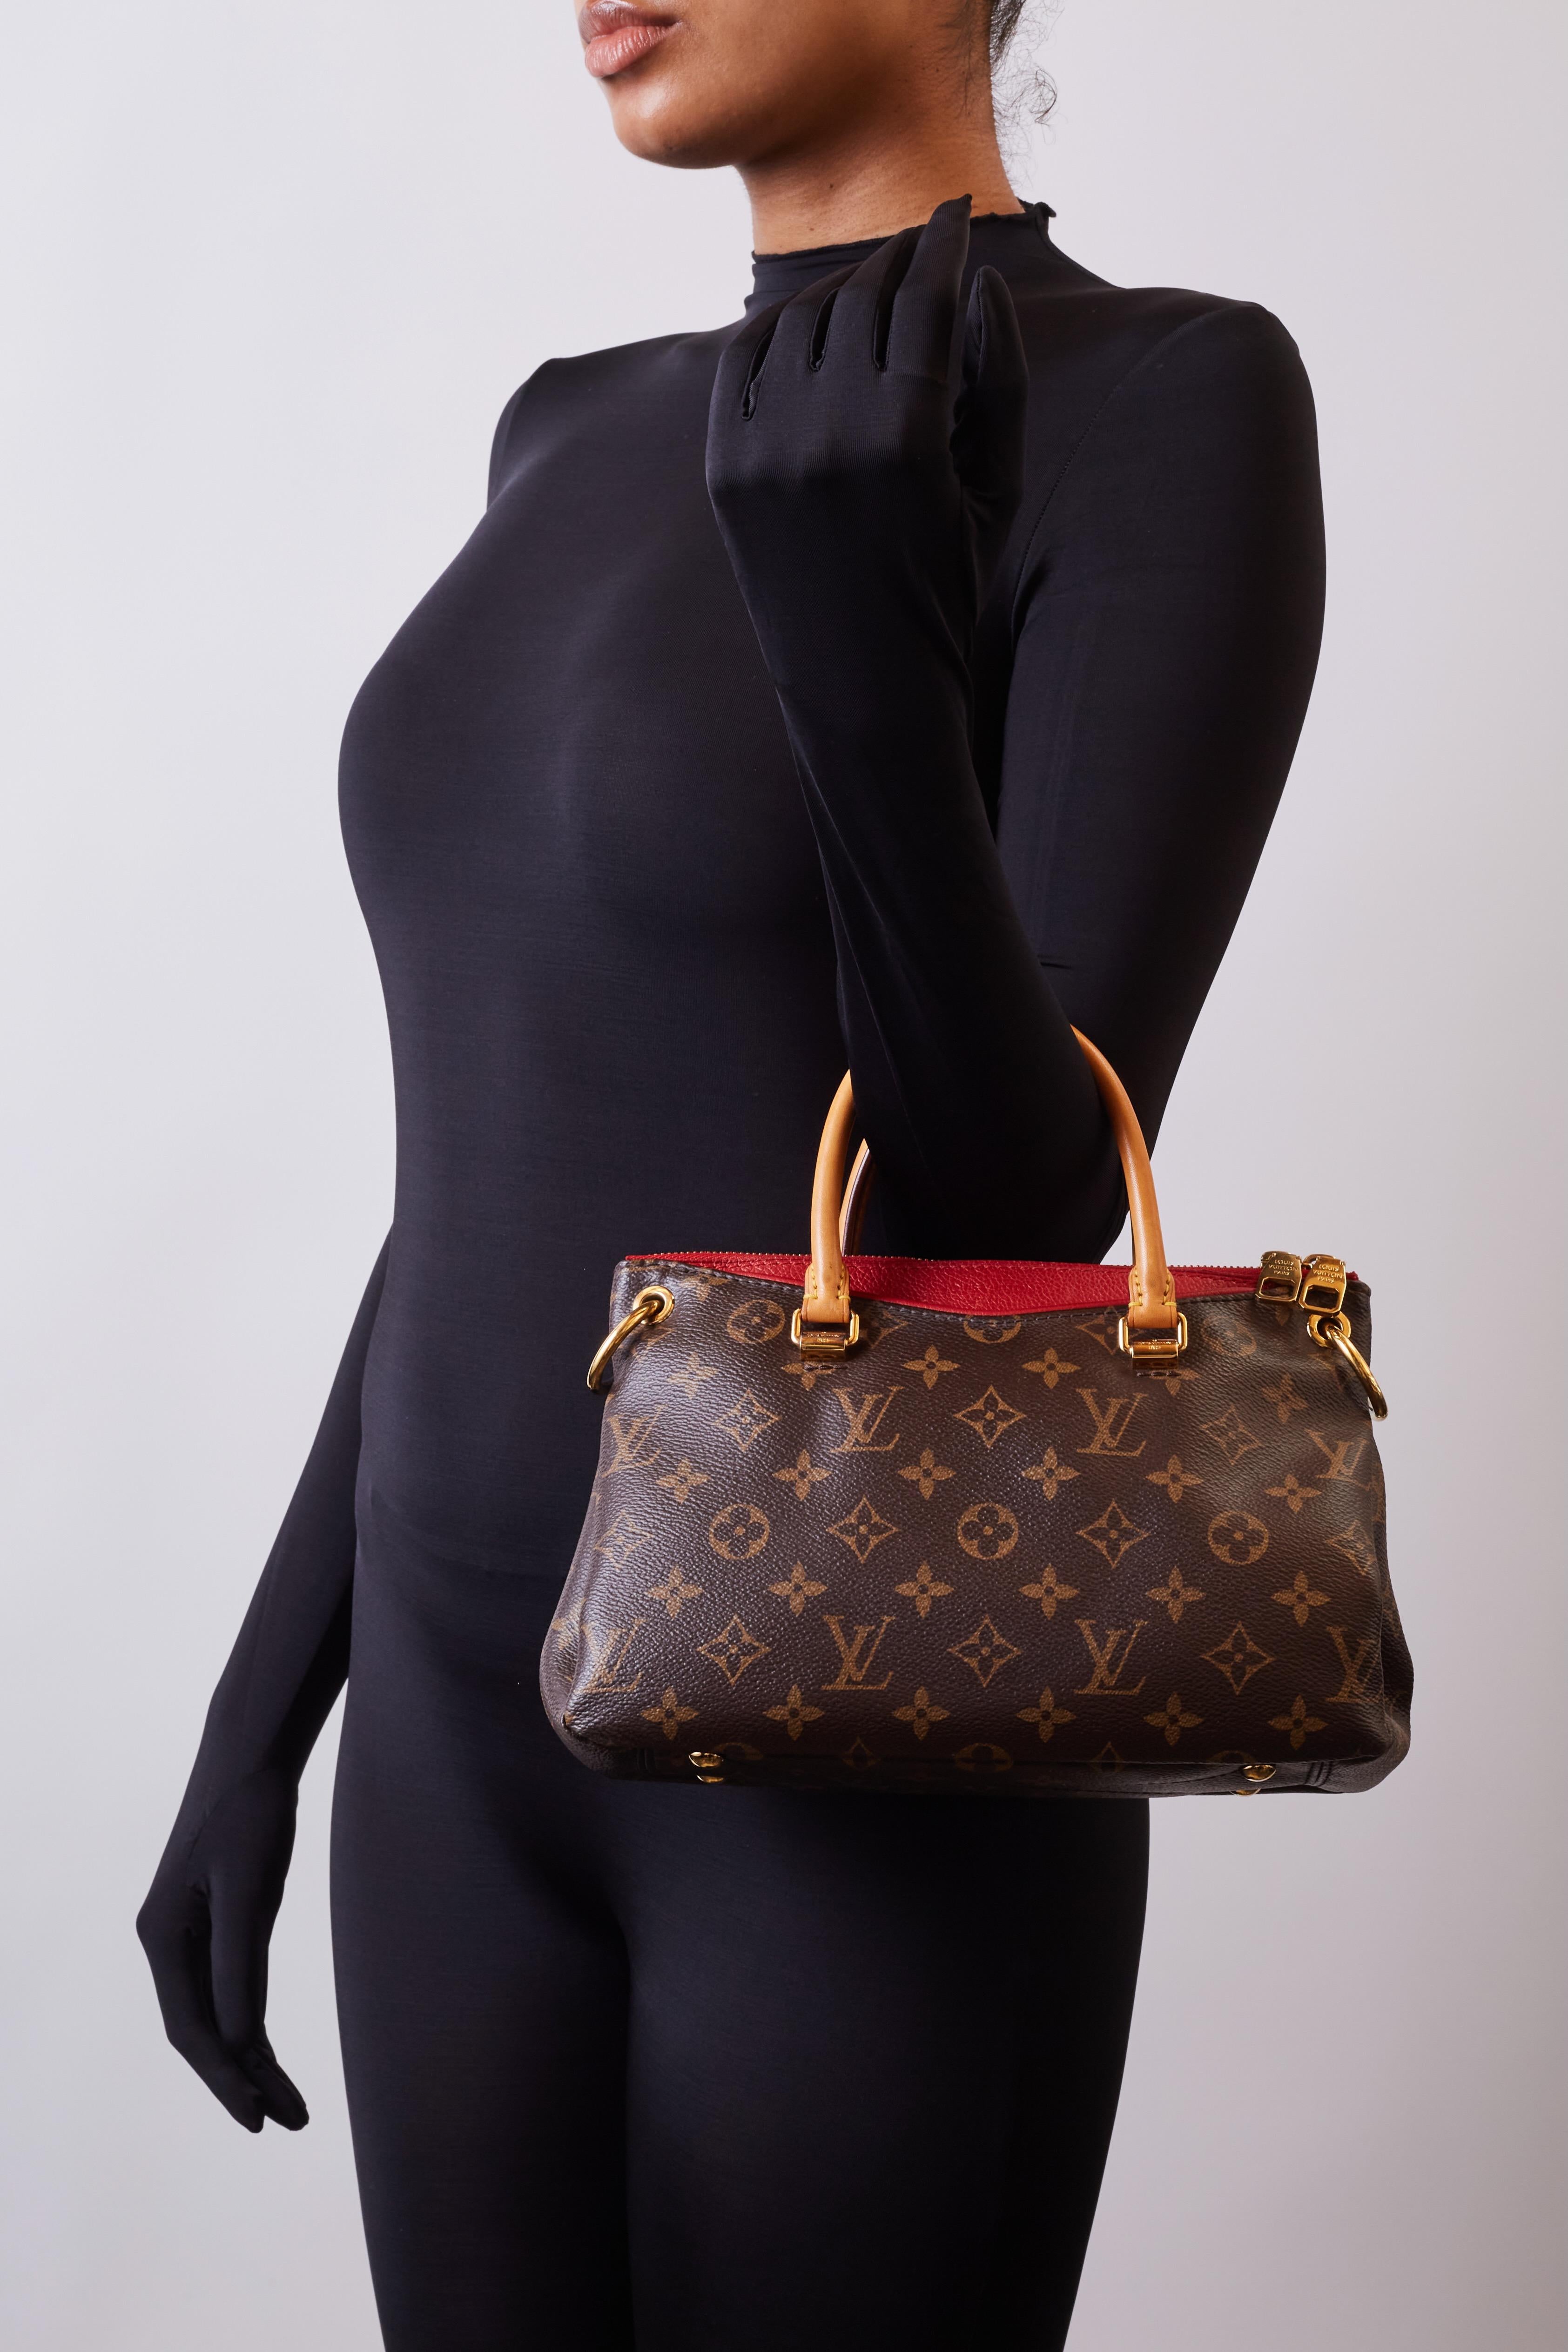 This bag is composed of the signature LV monogram coated canvas. Contrast is provided in red (Cerise) leather details throughout. The bag features gold-tone hardware, cowhide (Vachetta) trim, yellow contrast-stitching, 4 protective metal feet at